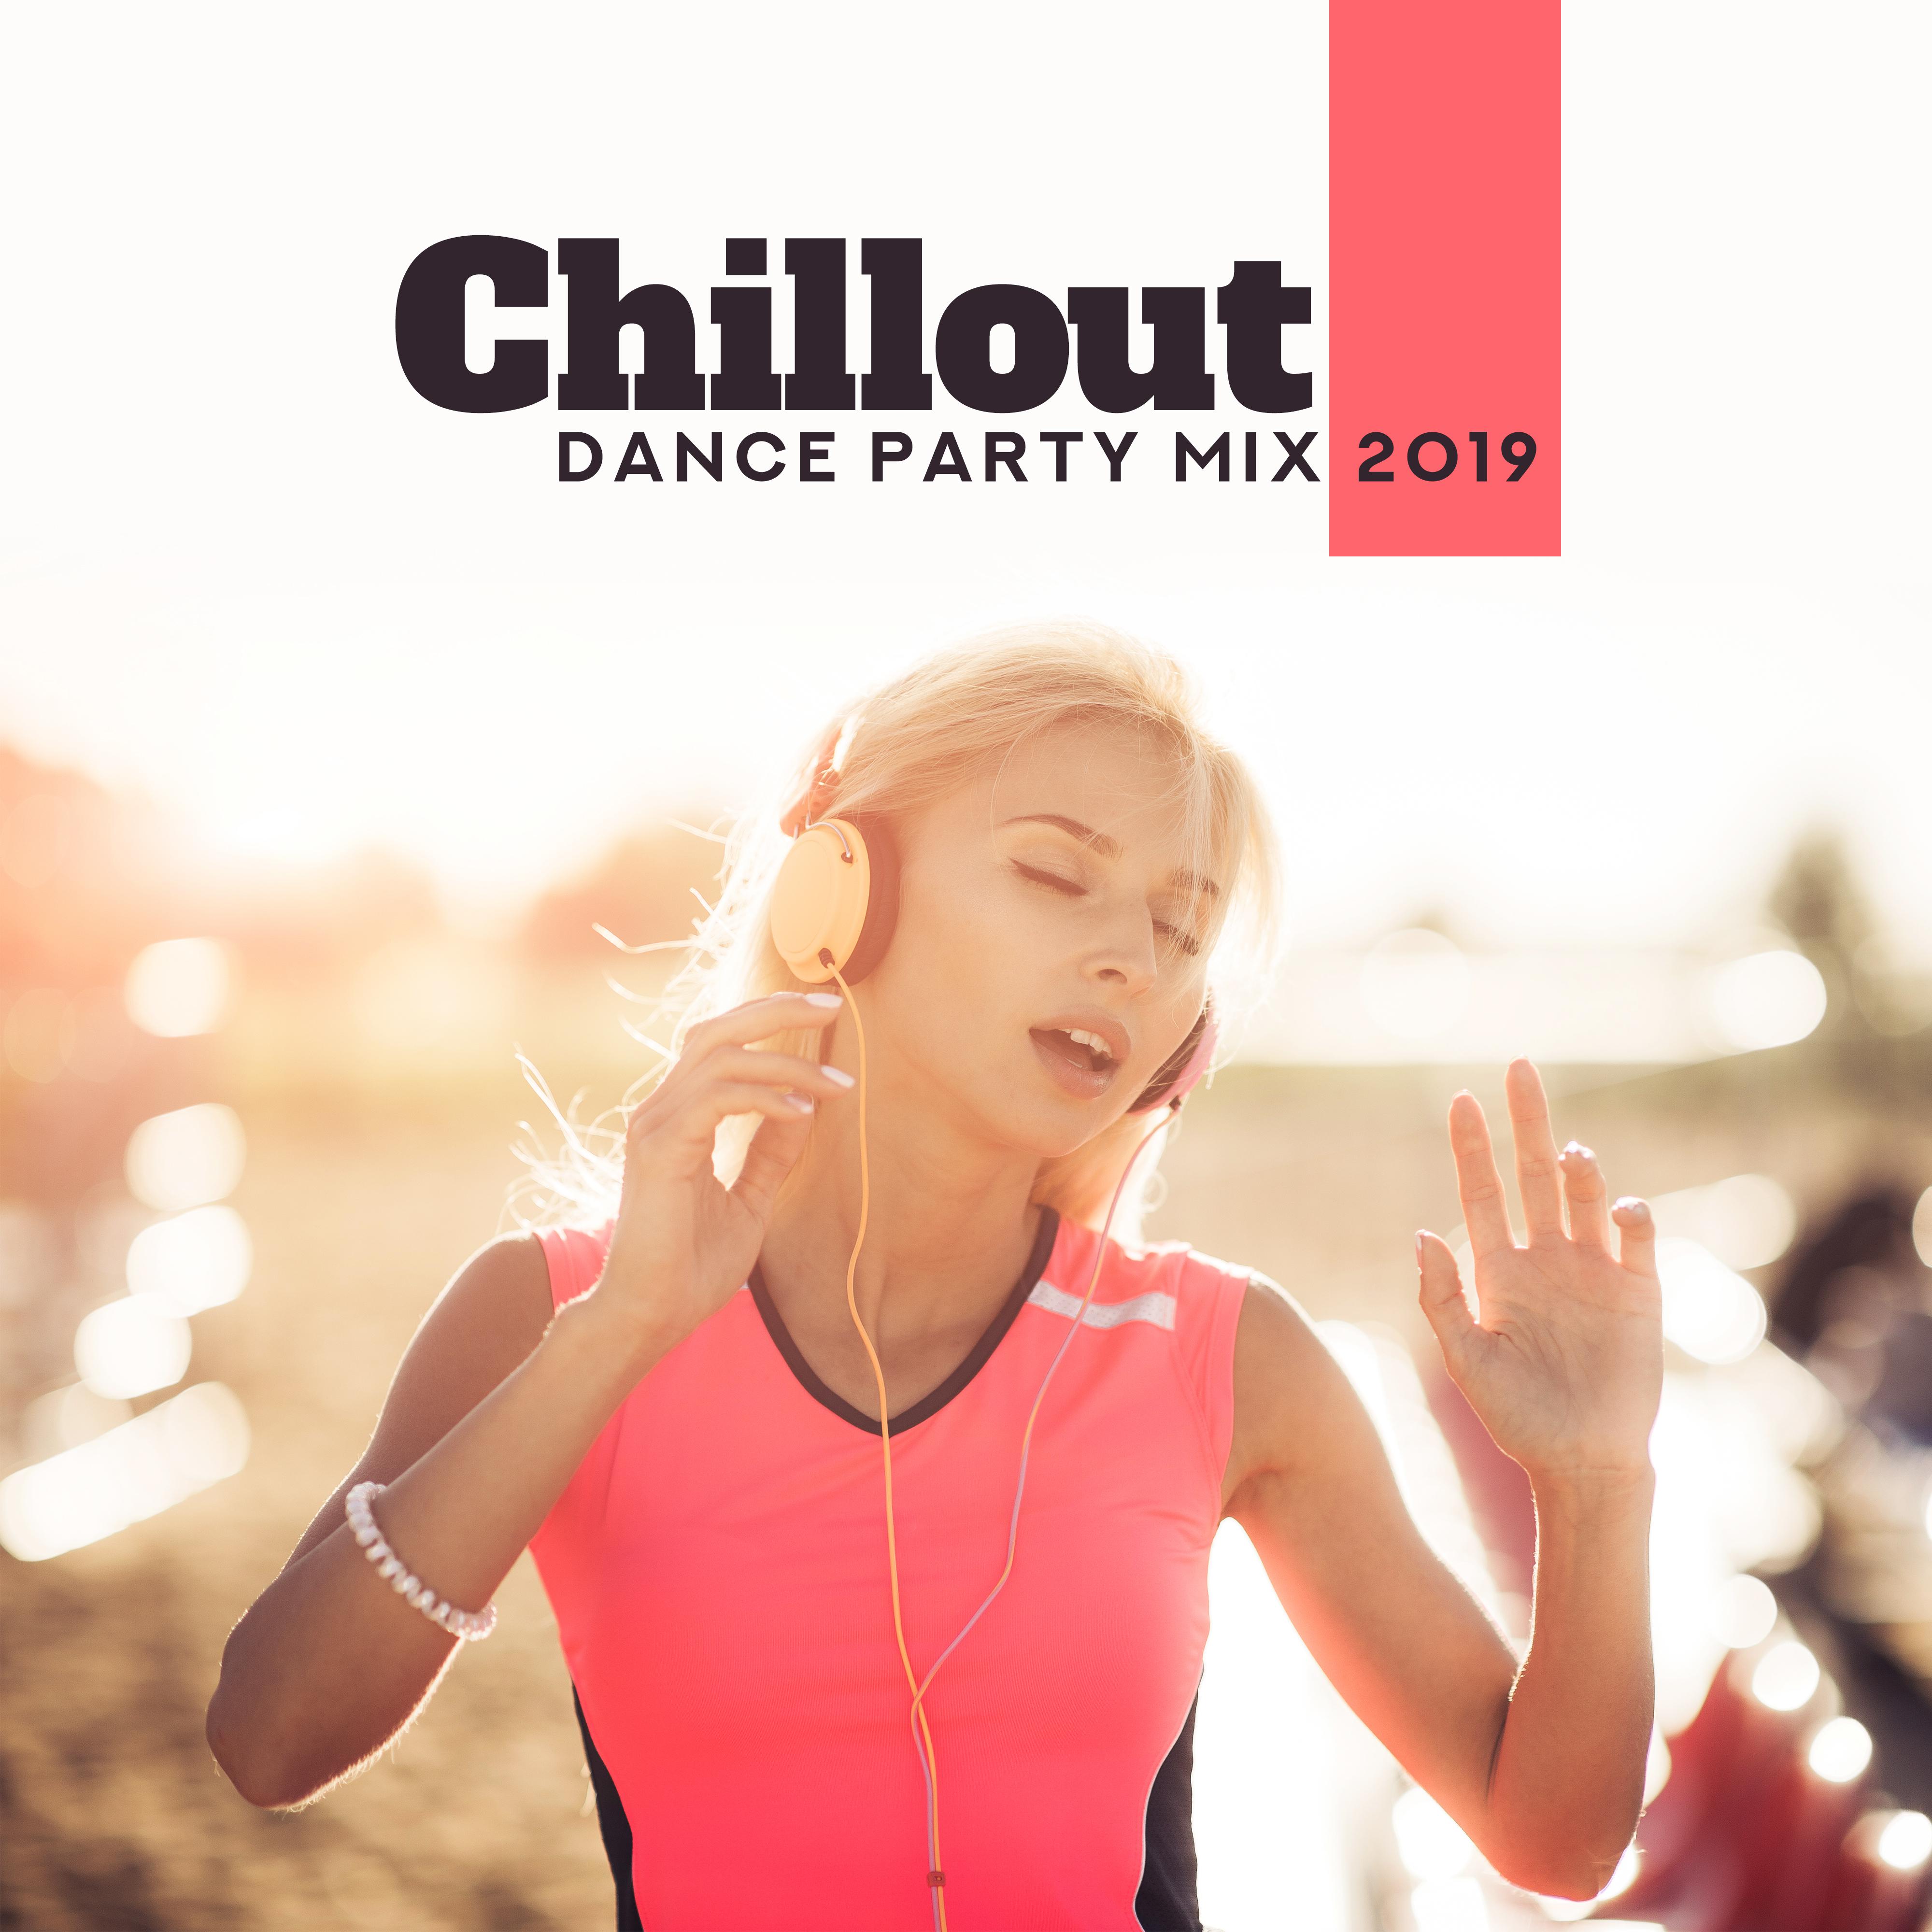 Chillout Dance Party Mix 2019  15 Hot Electronic Tunes for Evening Party, Energetic Progressive, Deep  Chill Music, Beach  Poolside Relaxing Songs